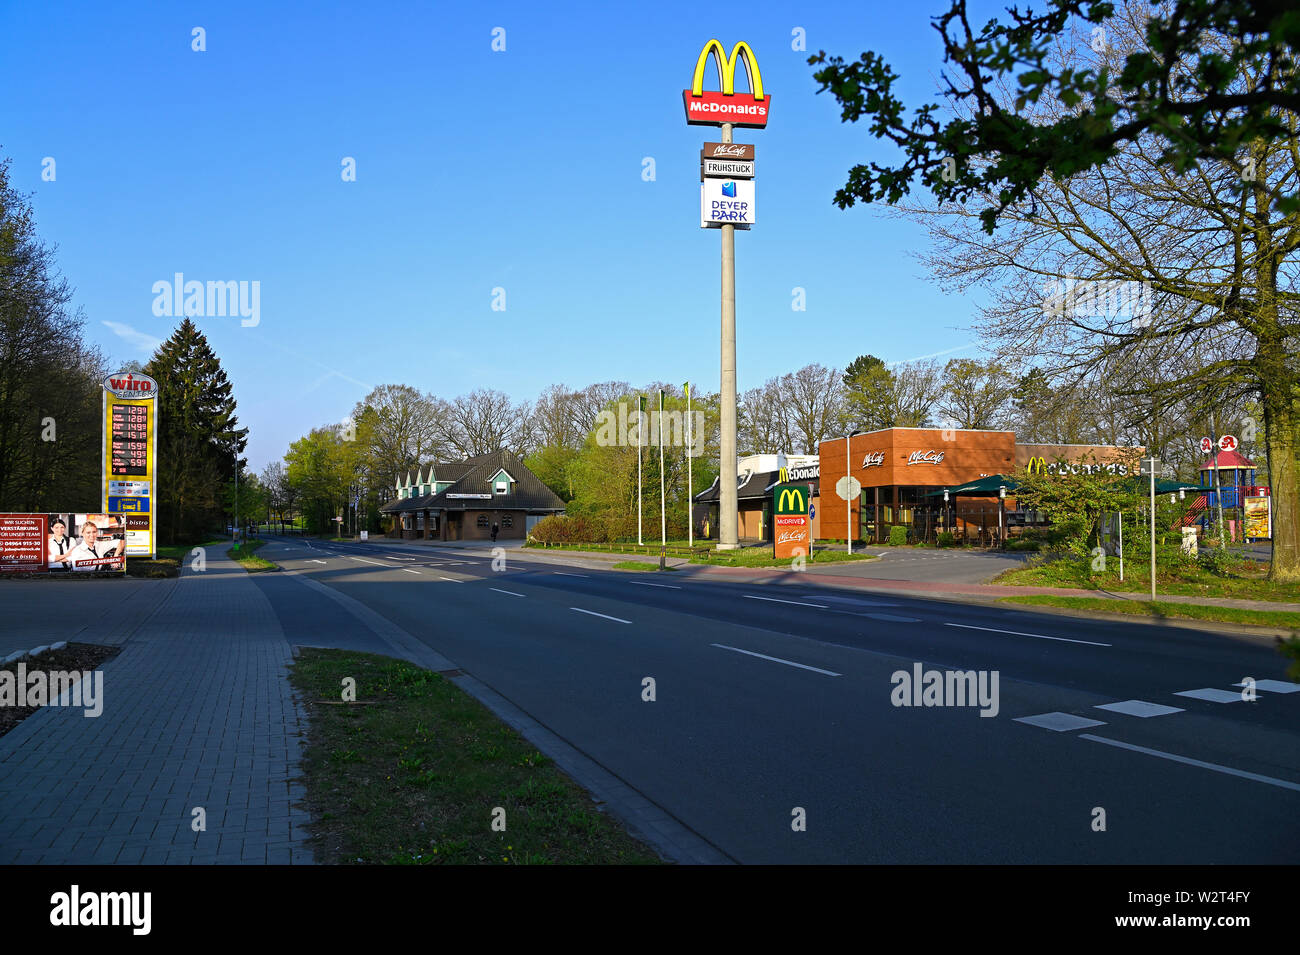 papenburg, germany - april 17, 2019:  main thoroughfare into and out of this city of papenburg, a petrol station, real estate agent office, mcdonalds Stock Photo